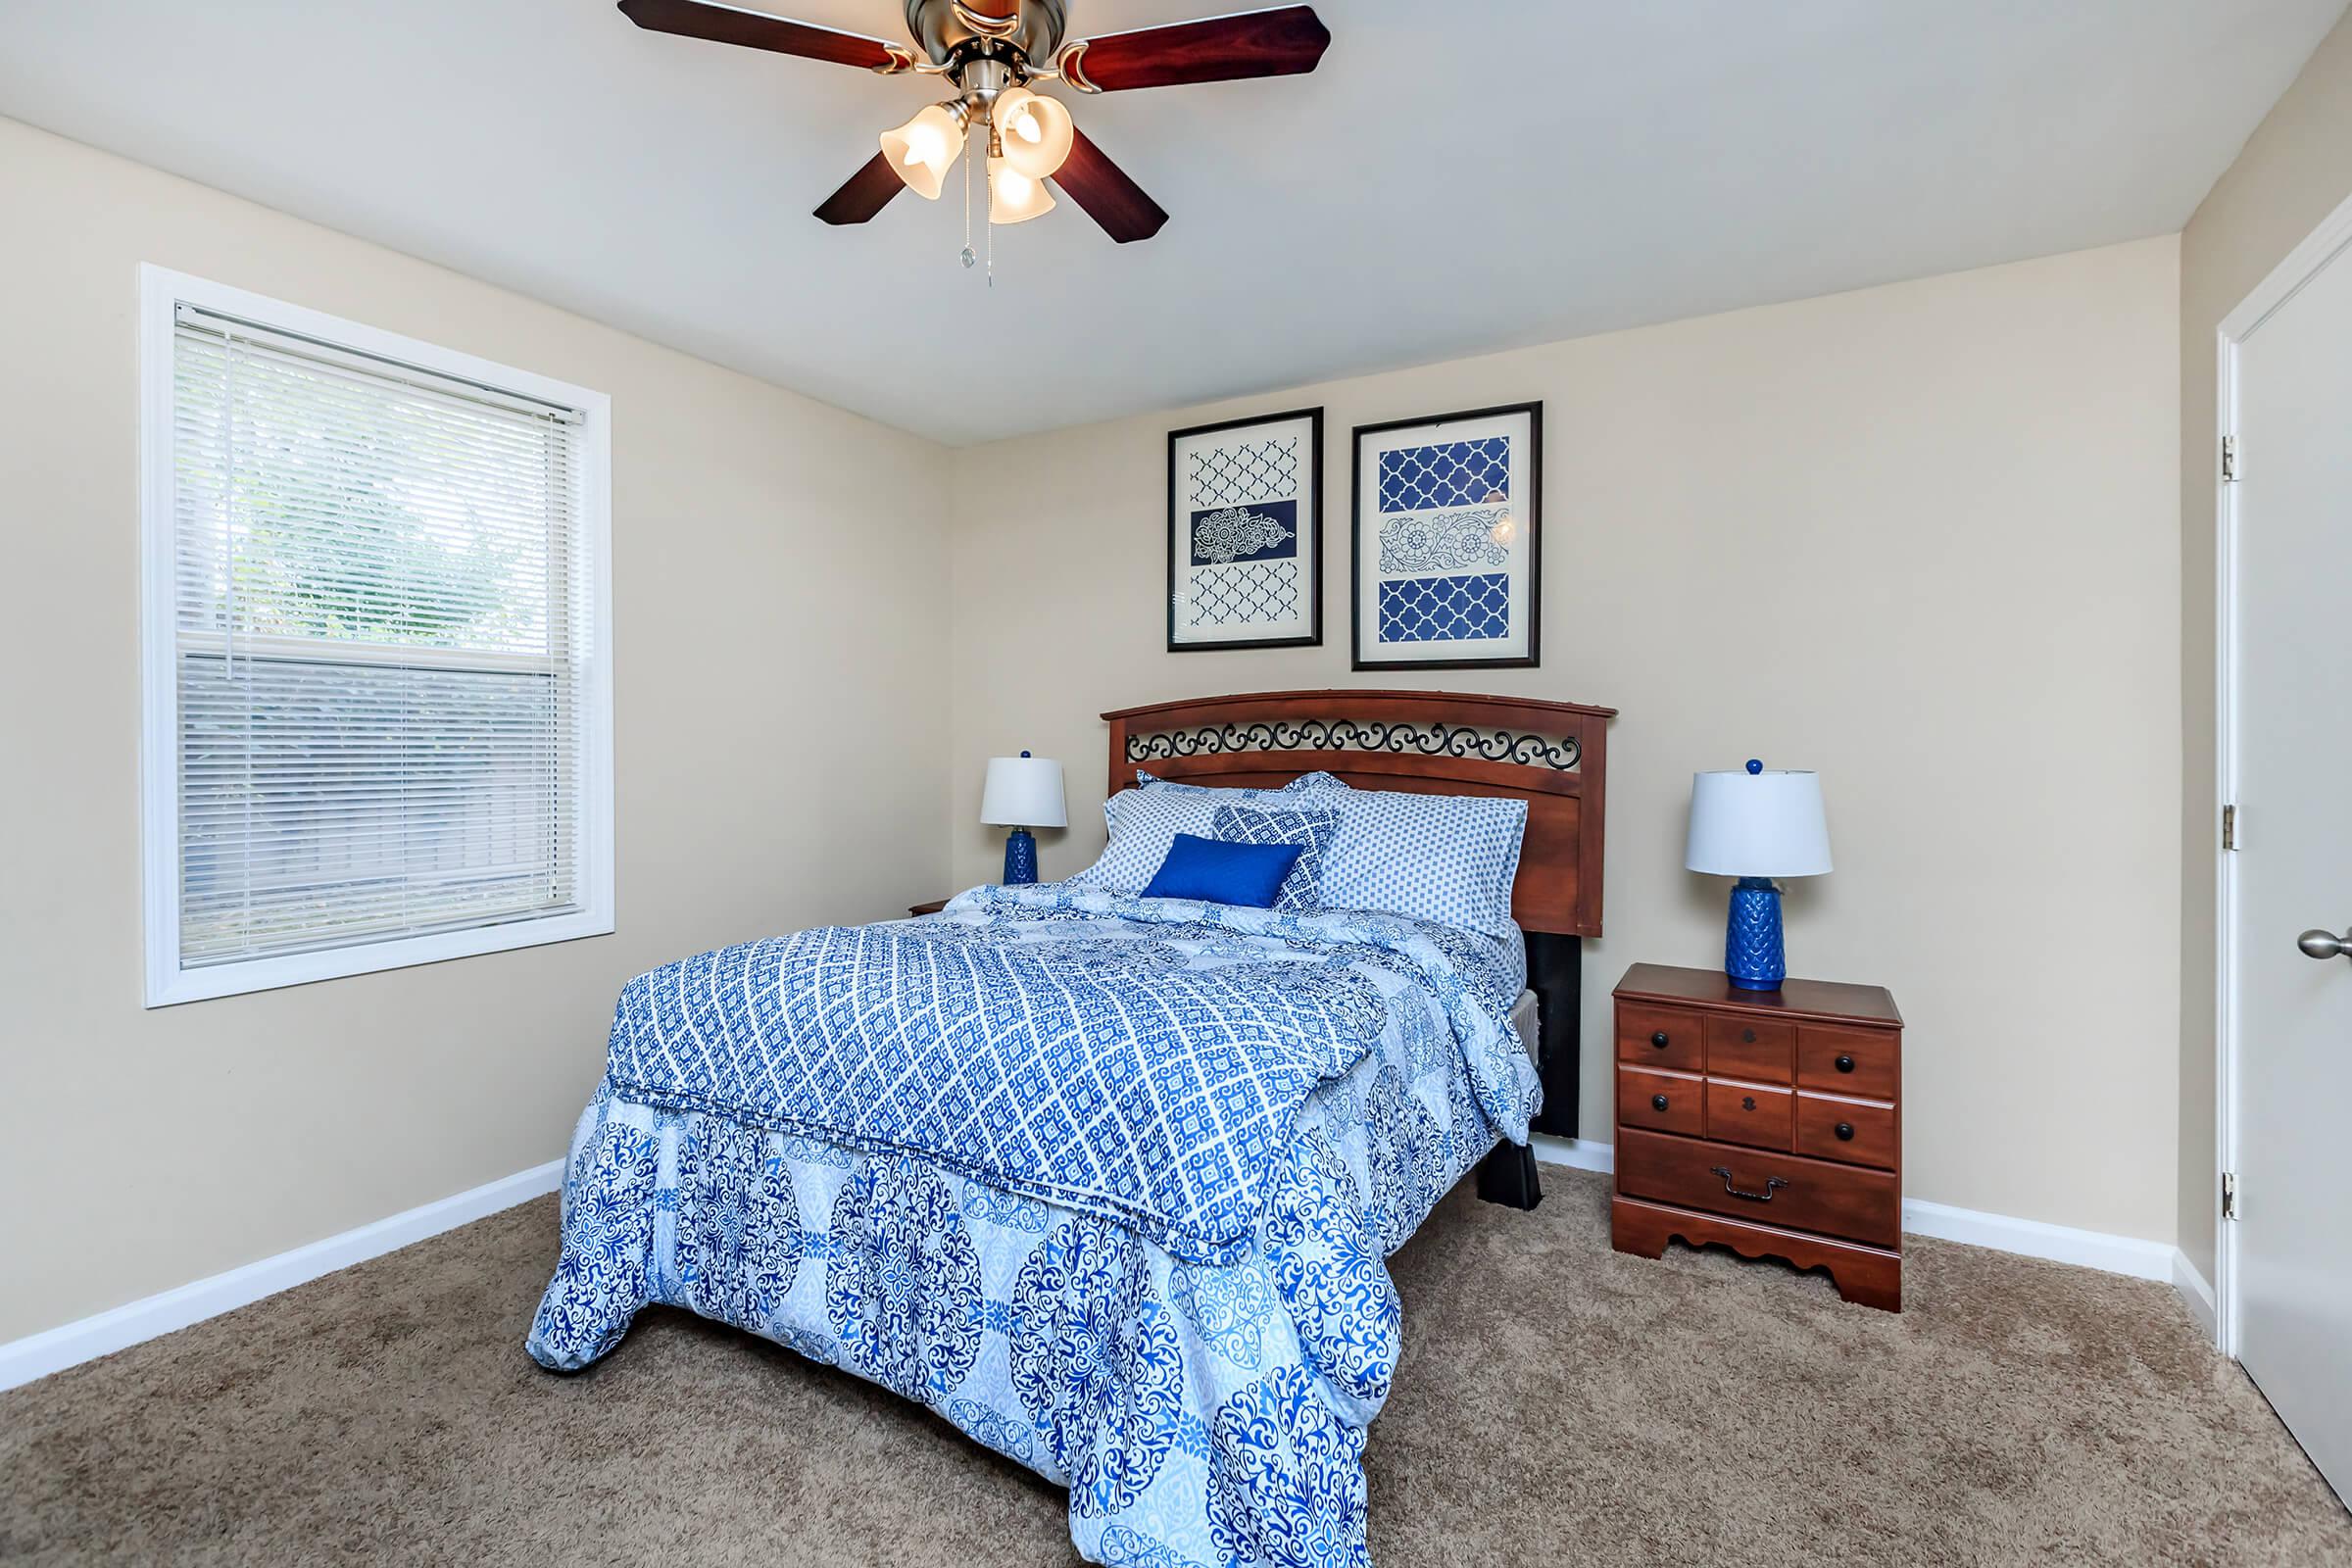 Plush carpeting in bedrooms at The Residences at 1671 Campbell in Clarksville, Tennessee